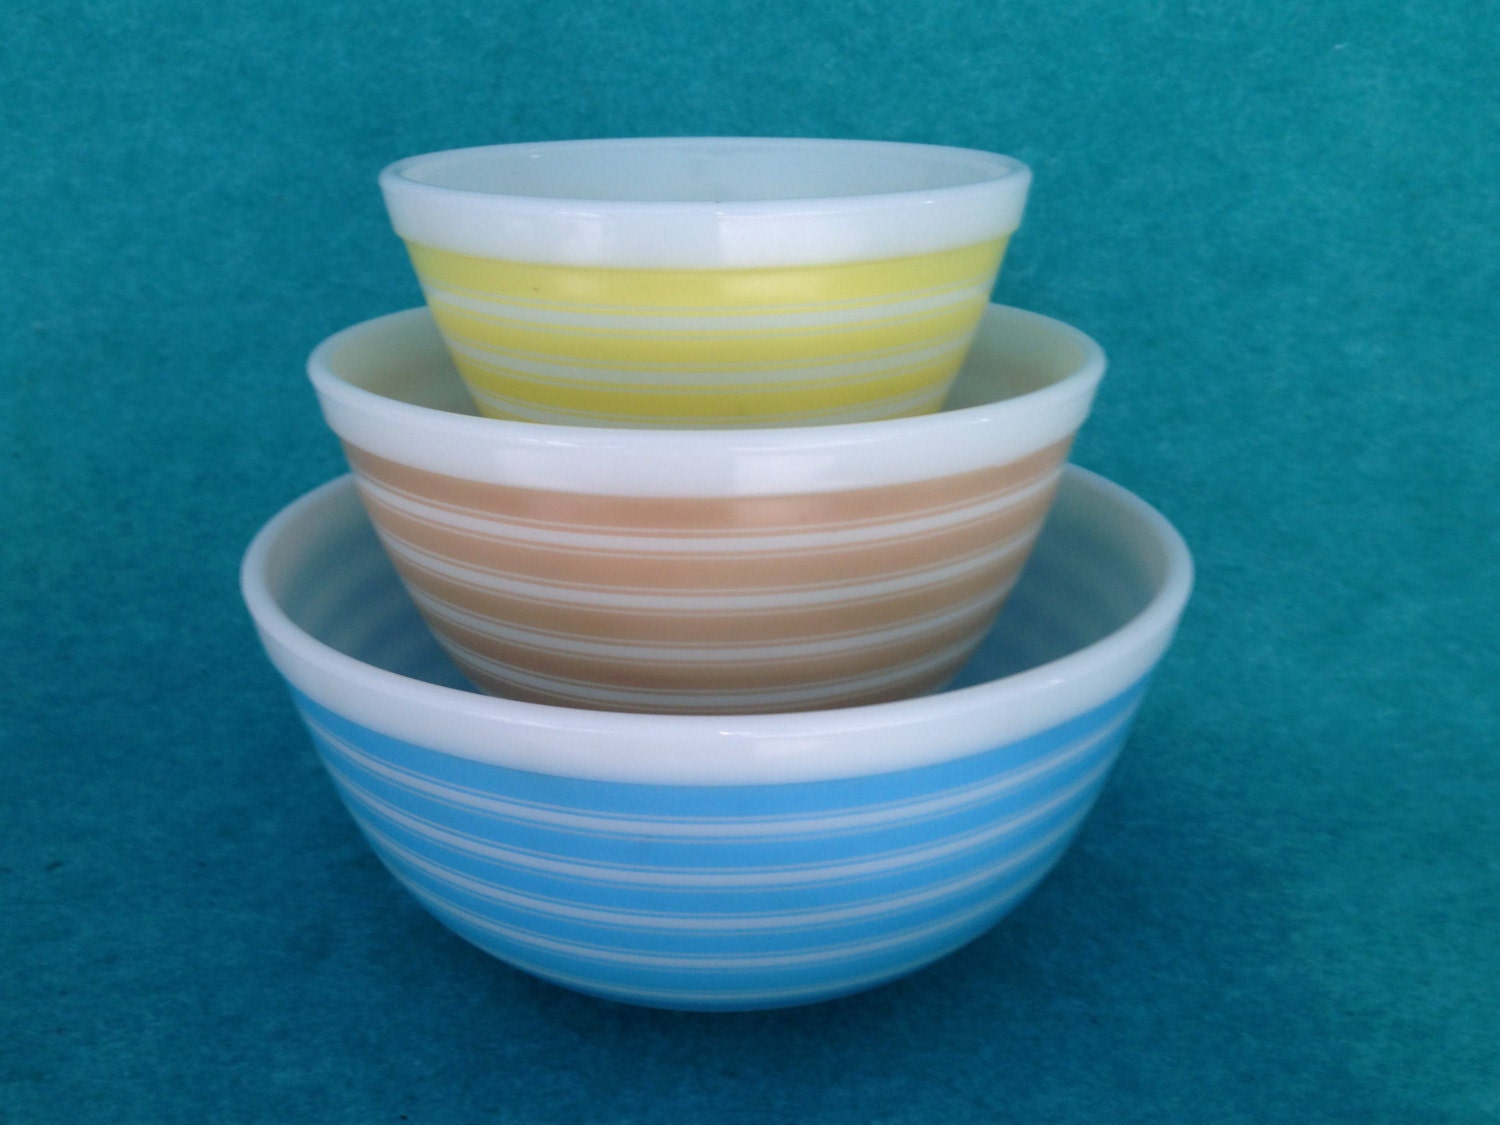 Pyrex Glass Mixing Bowl 3 Piece Set Round Banded Rings Stripes